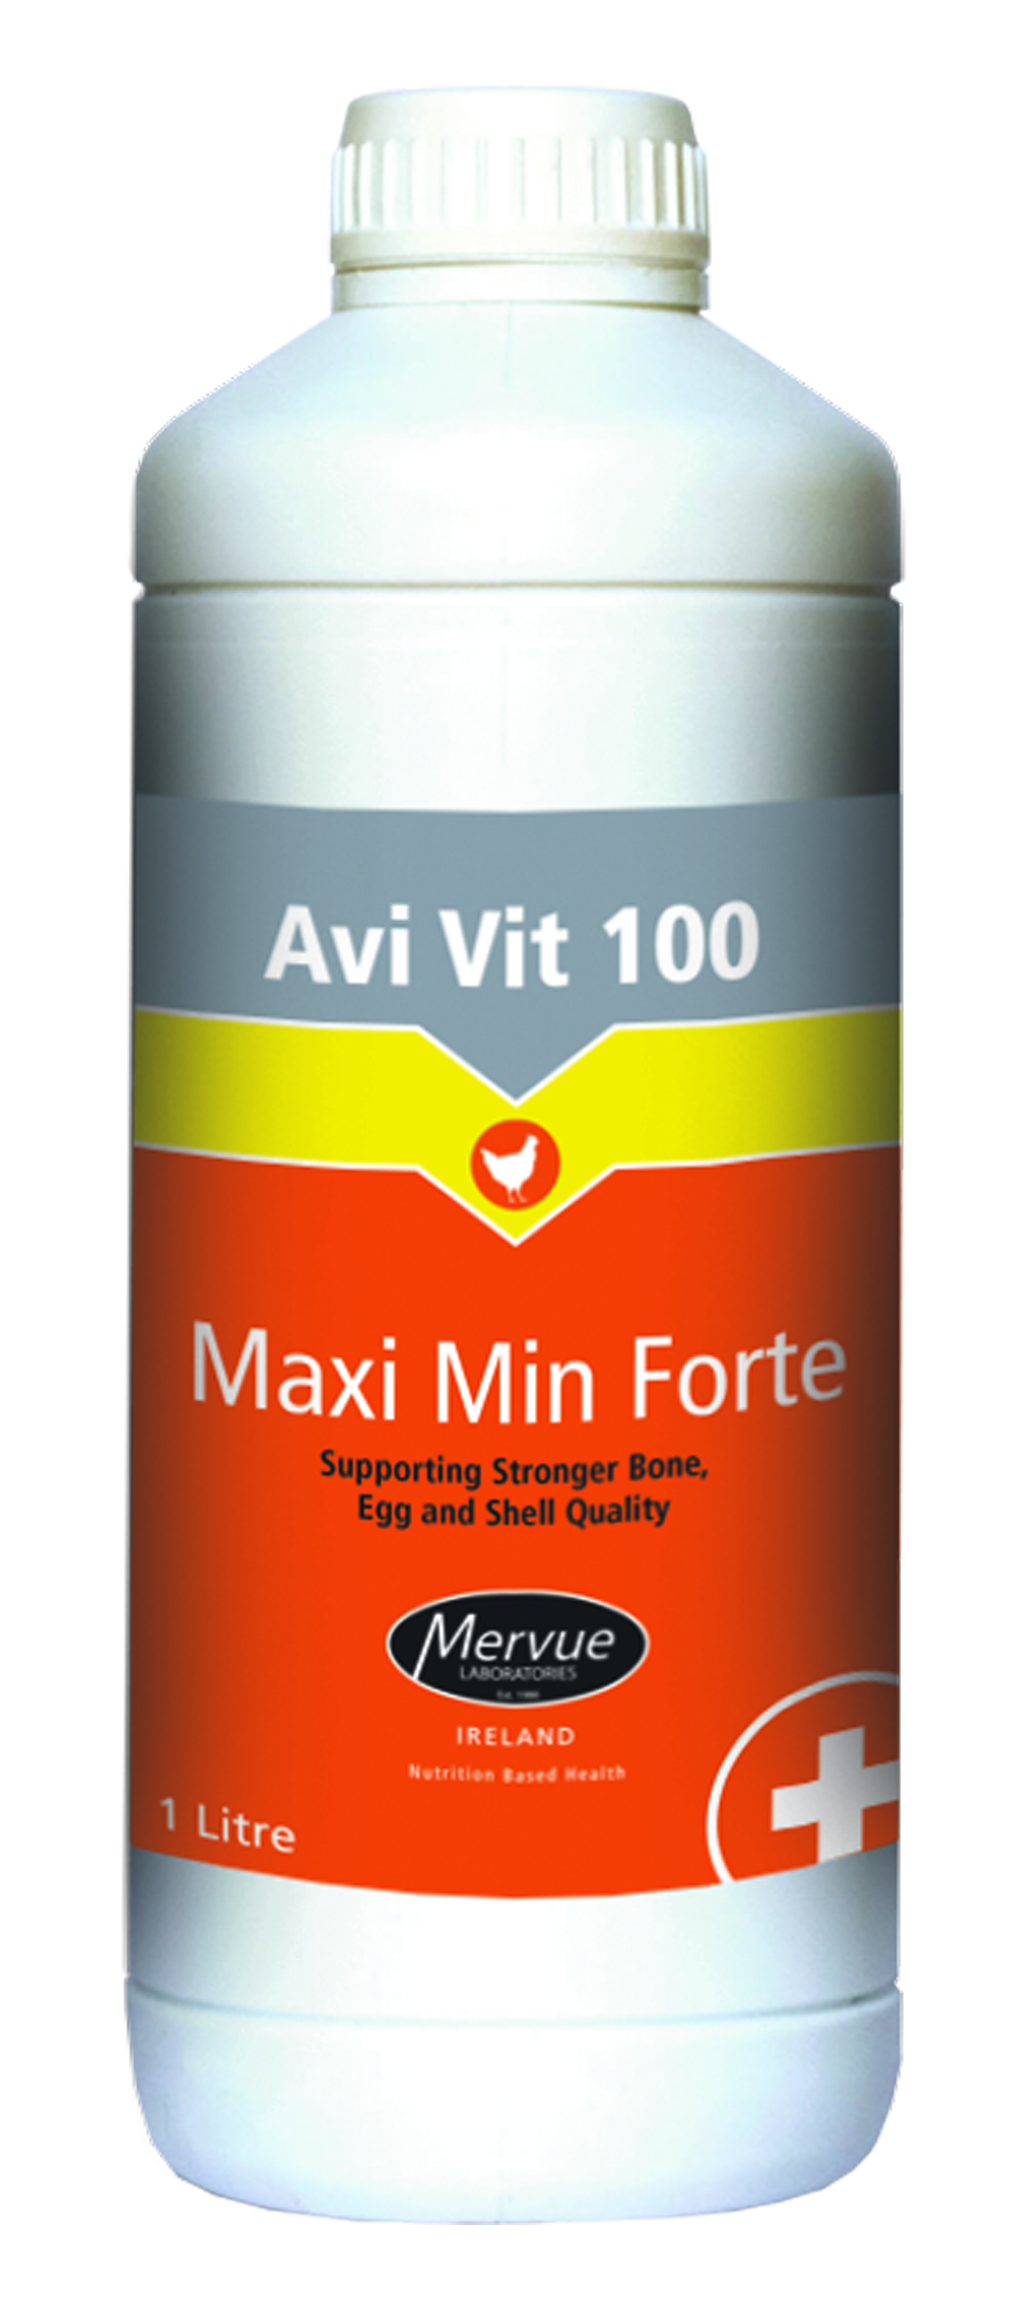 Maxi Min Forte (FORS 2261)